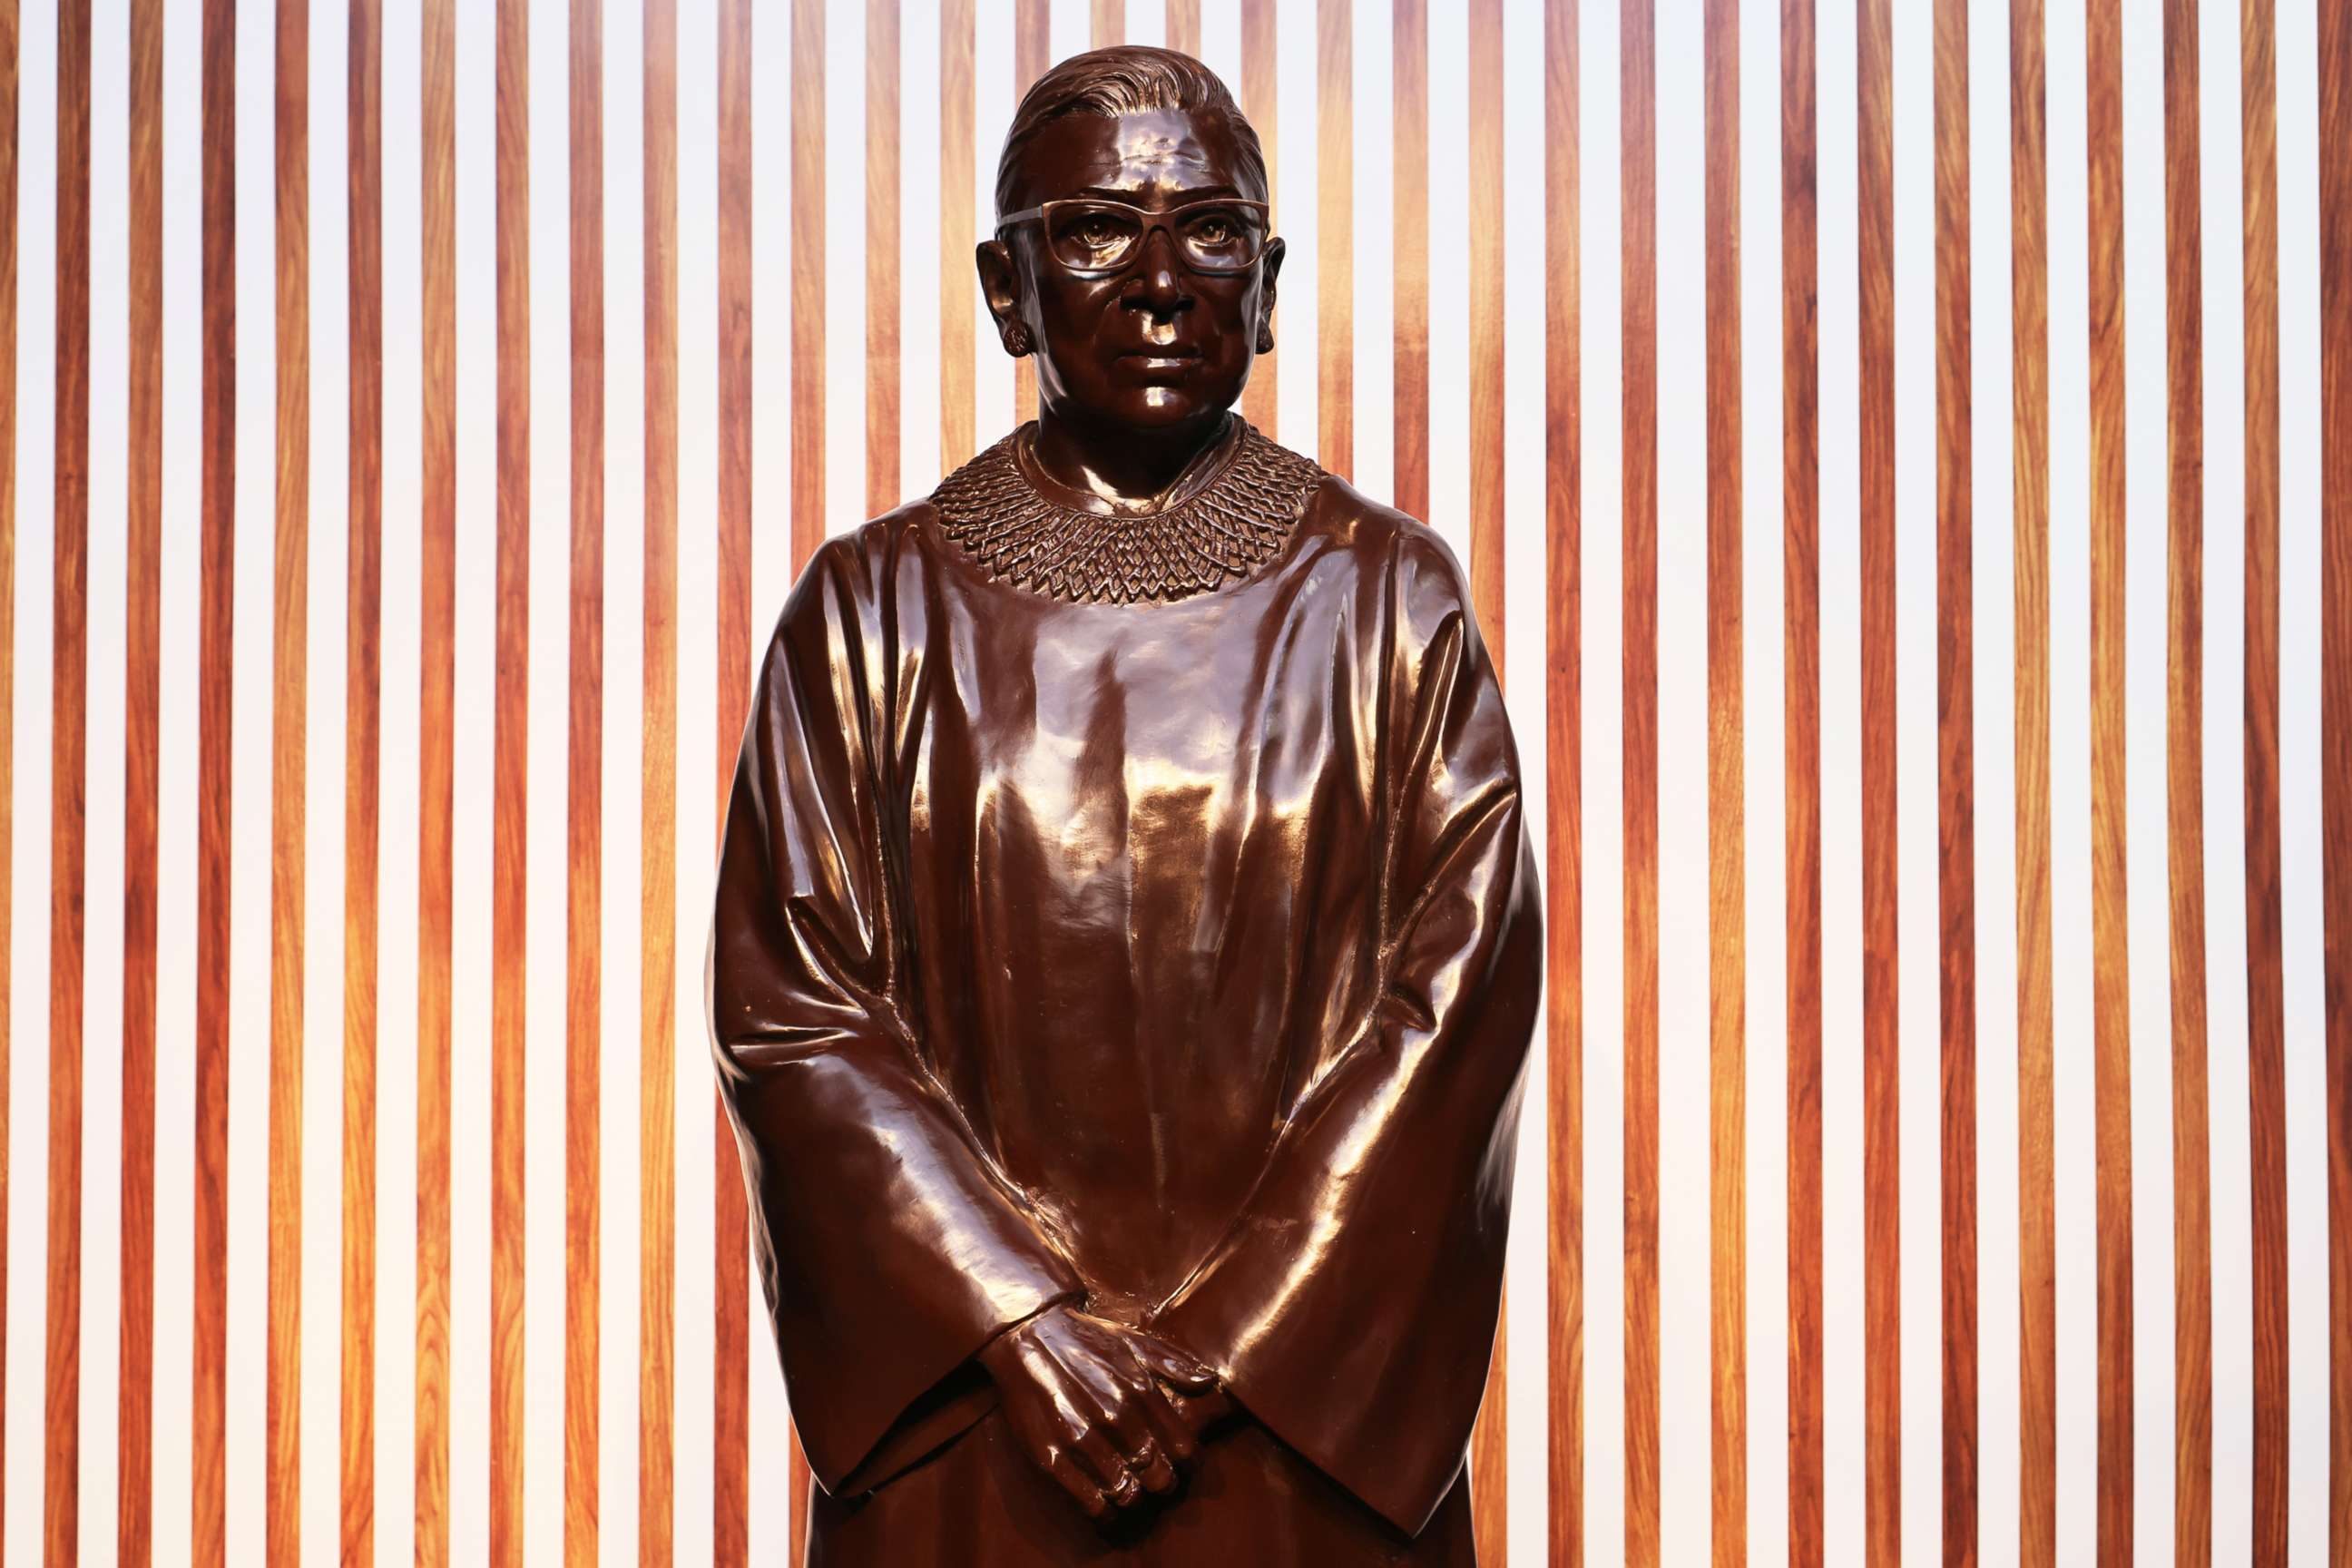 PHOTO: The statue of the late US Supreme Court Justice Ruth Bader Ginsburg is seen at City Point, Brooklyn, on March 12, 2021, in New York.